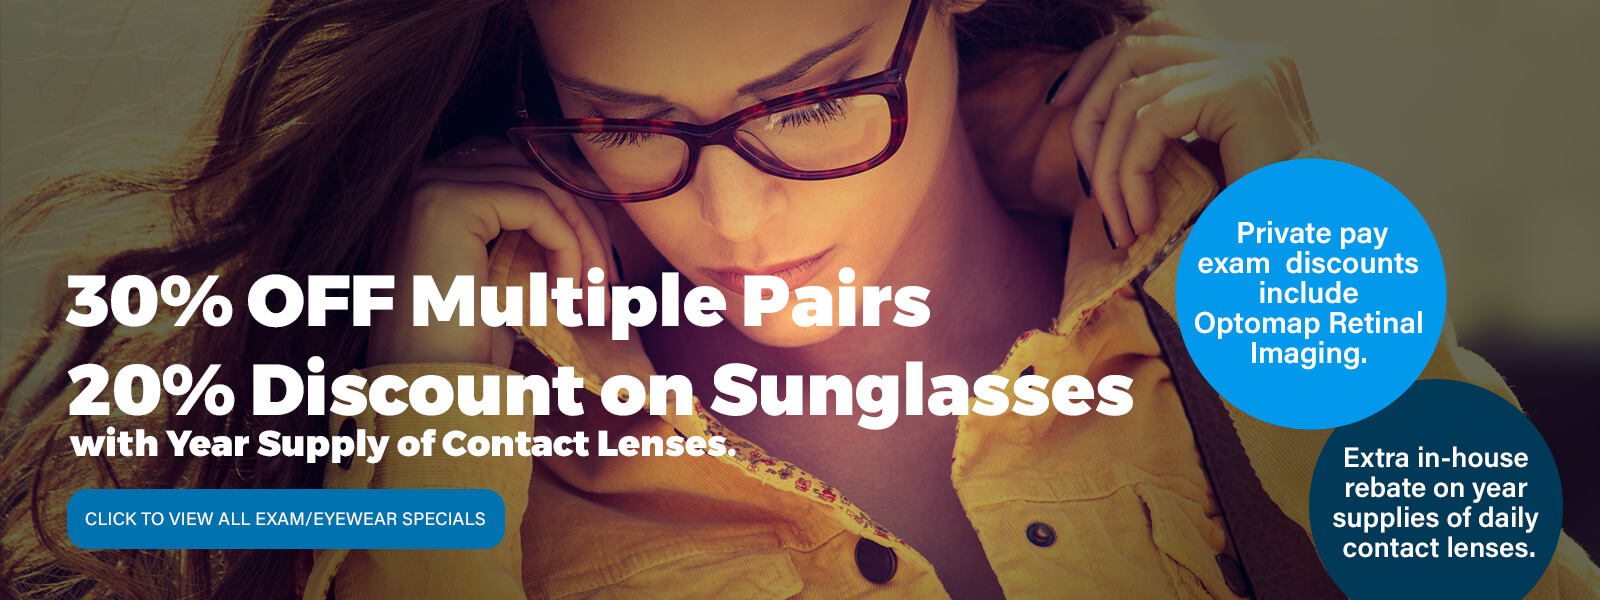 Eyelux promotional ad. 30% off multiple pairs of glasses. 96 dollar rebates on annual supply of contact lenses. Exam and designer glasses starting at 226 dollars. 